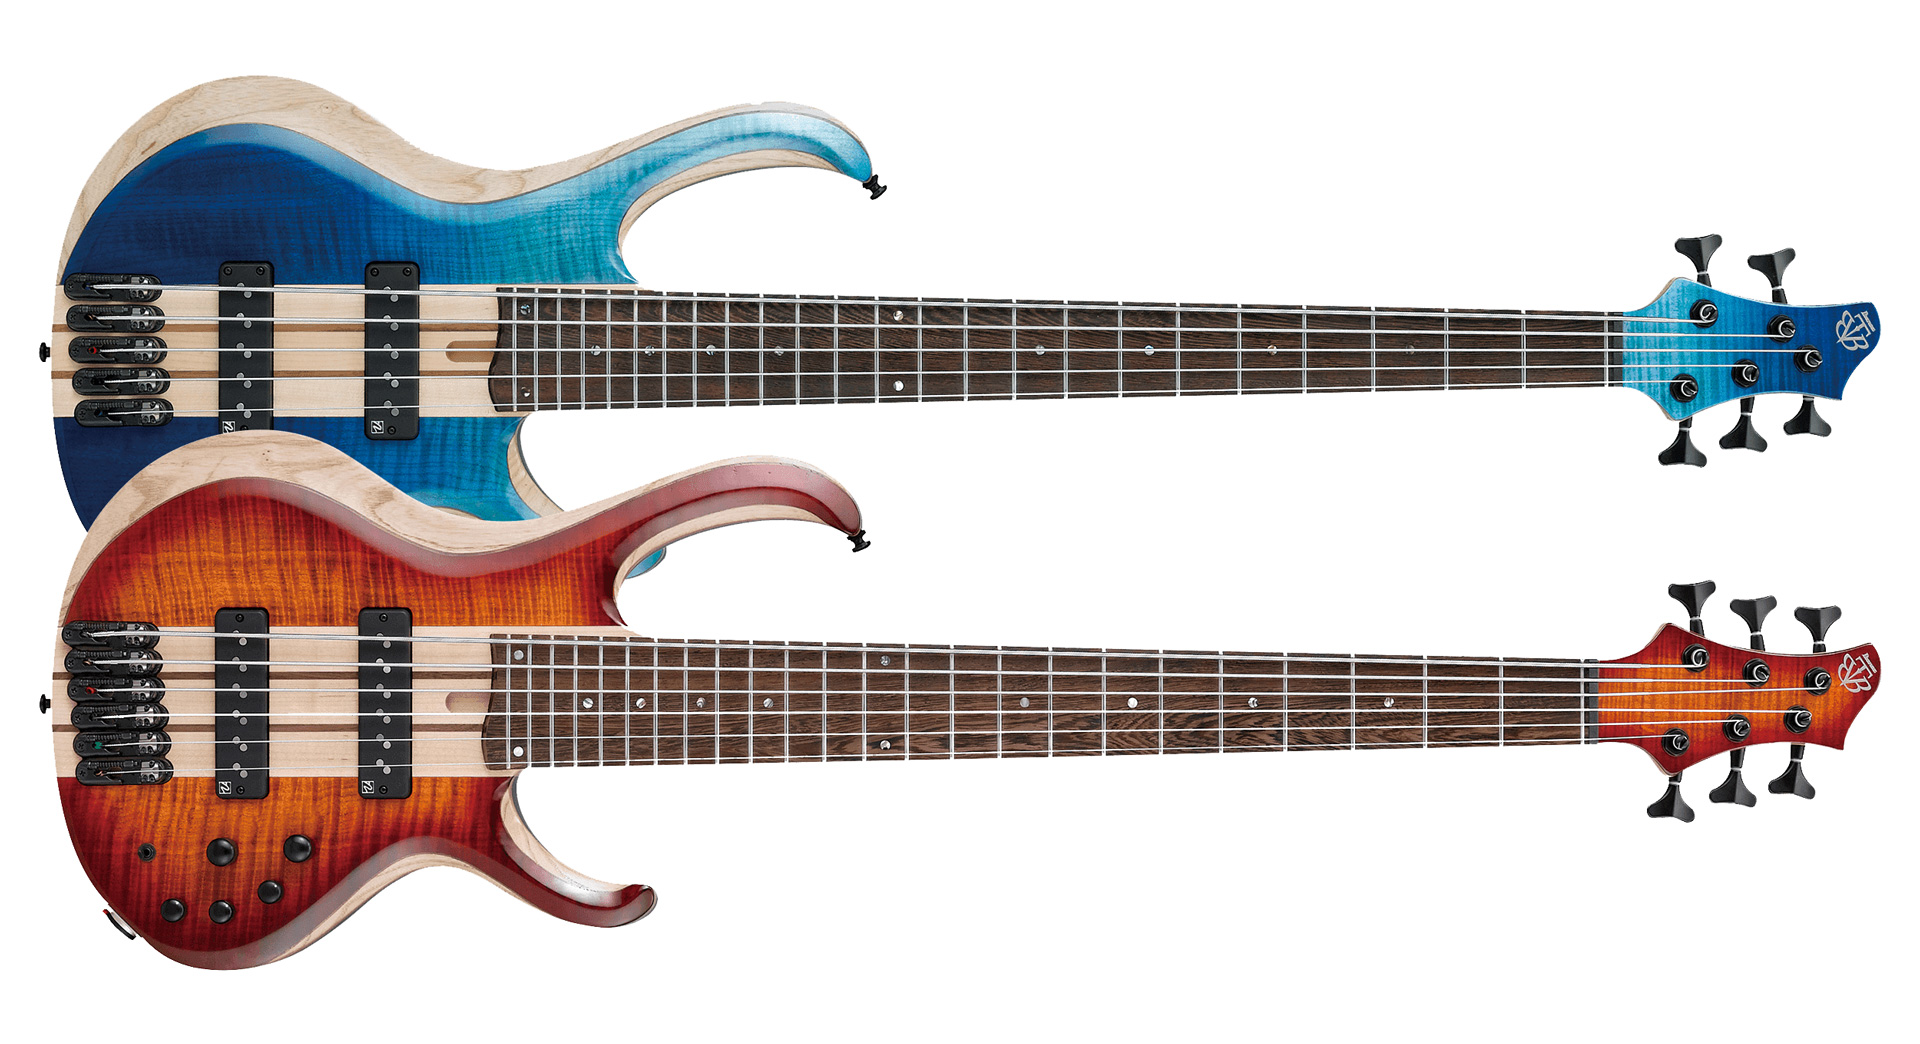 Ibanez is known for its massive selection of basses, including many quality 6-string models.